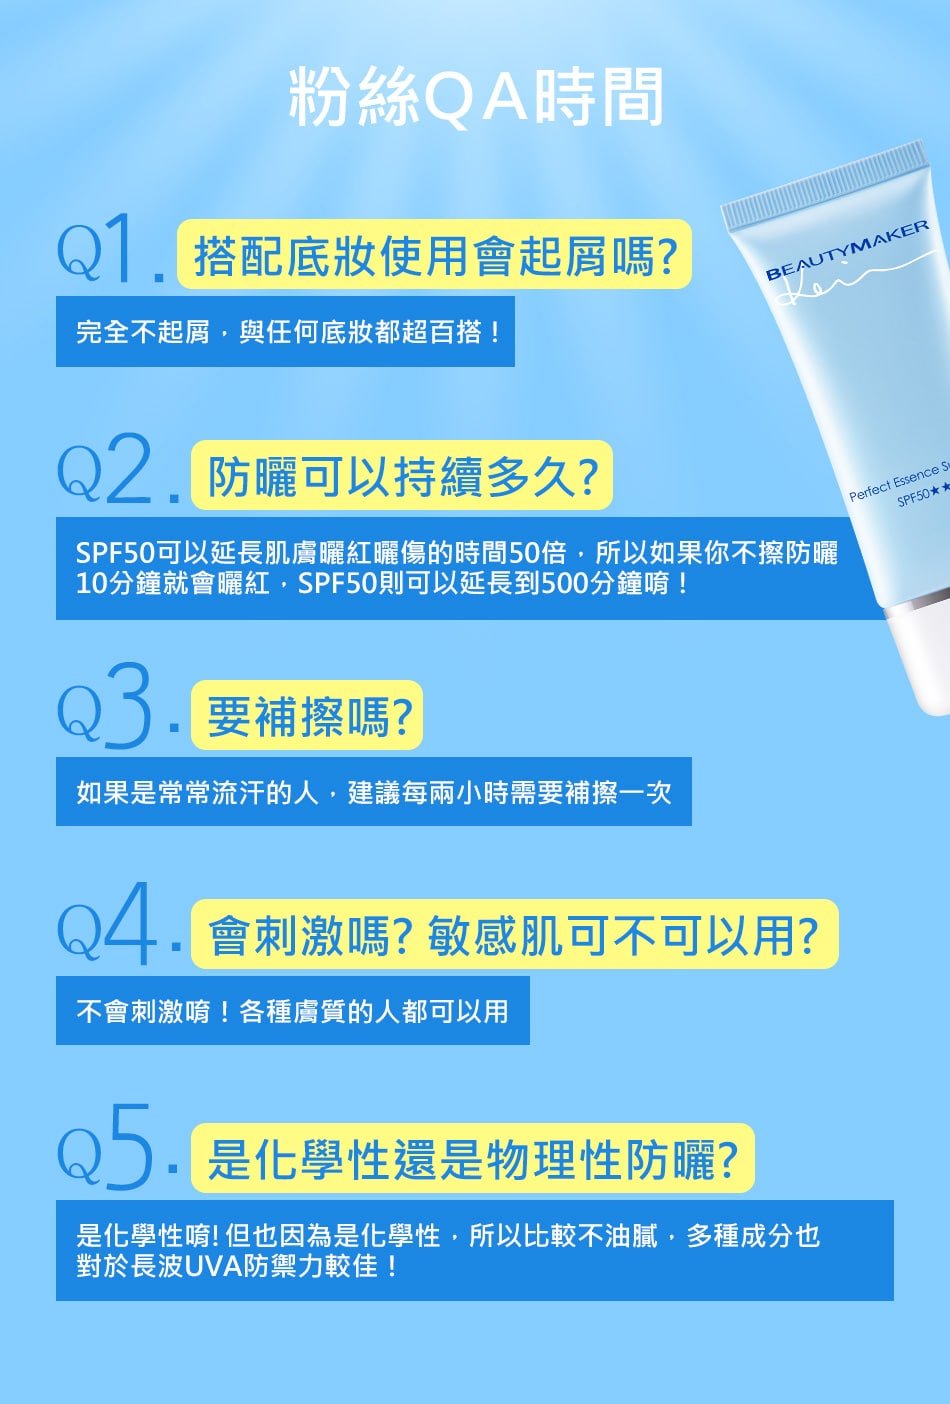 Beautymaker Perfect Essence Sunscreen - Product QnA